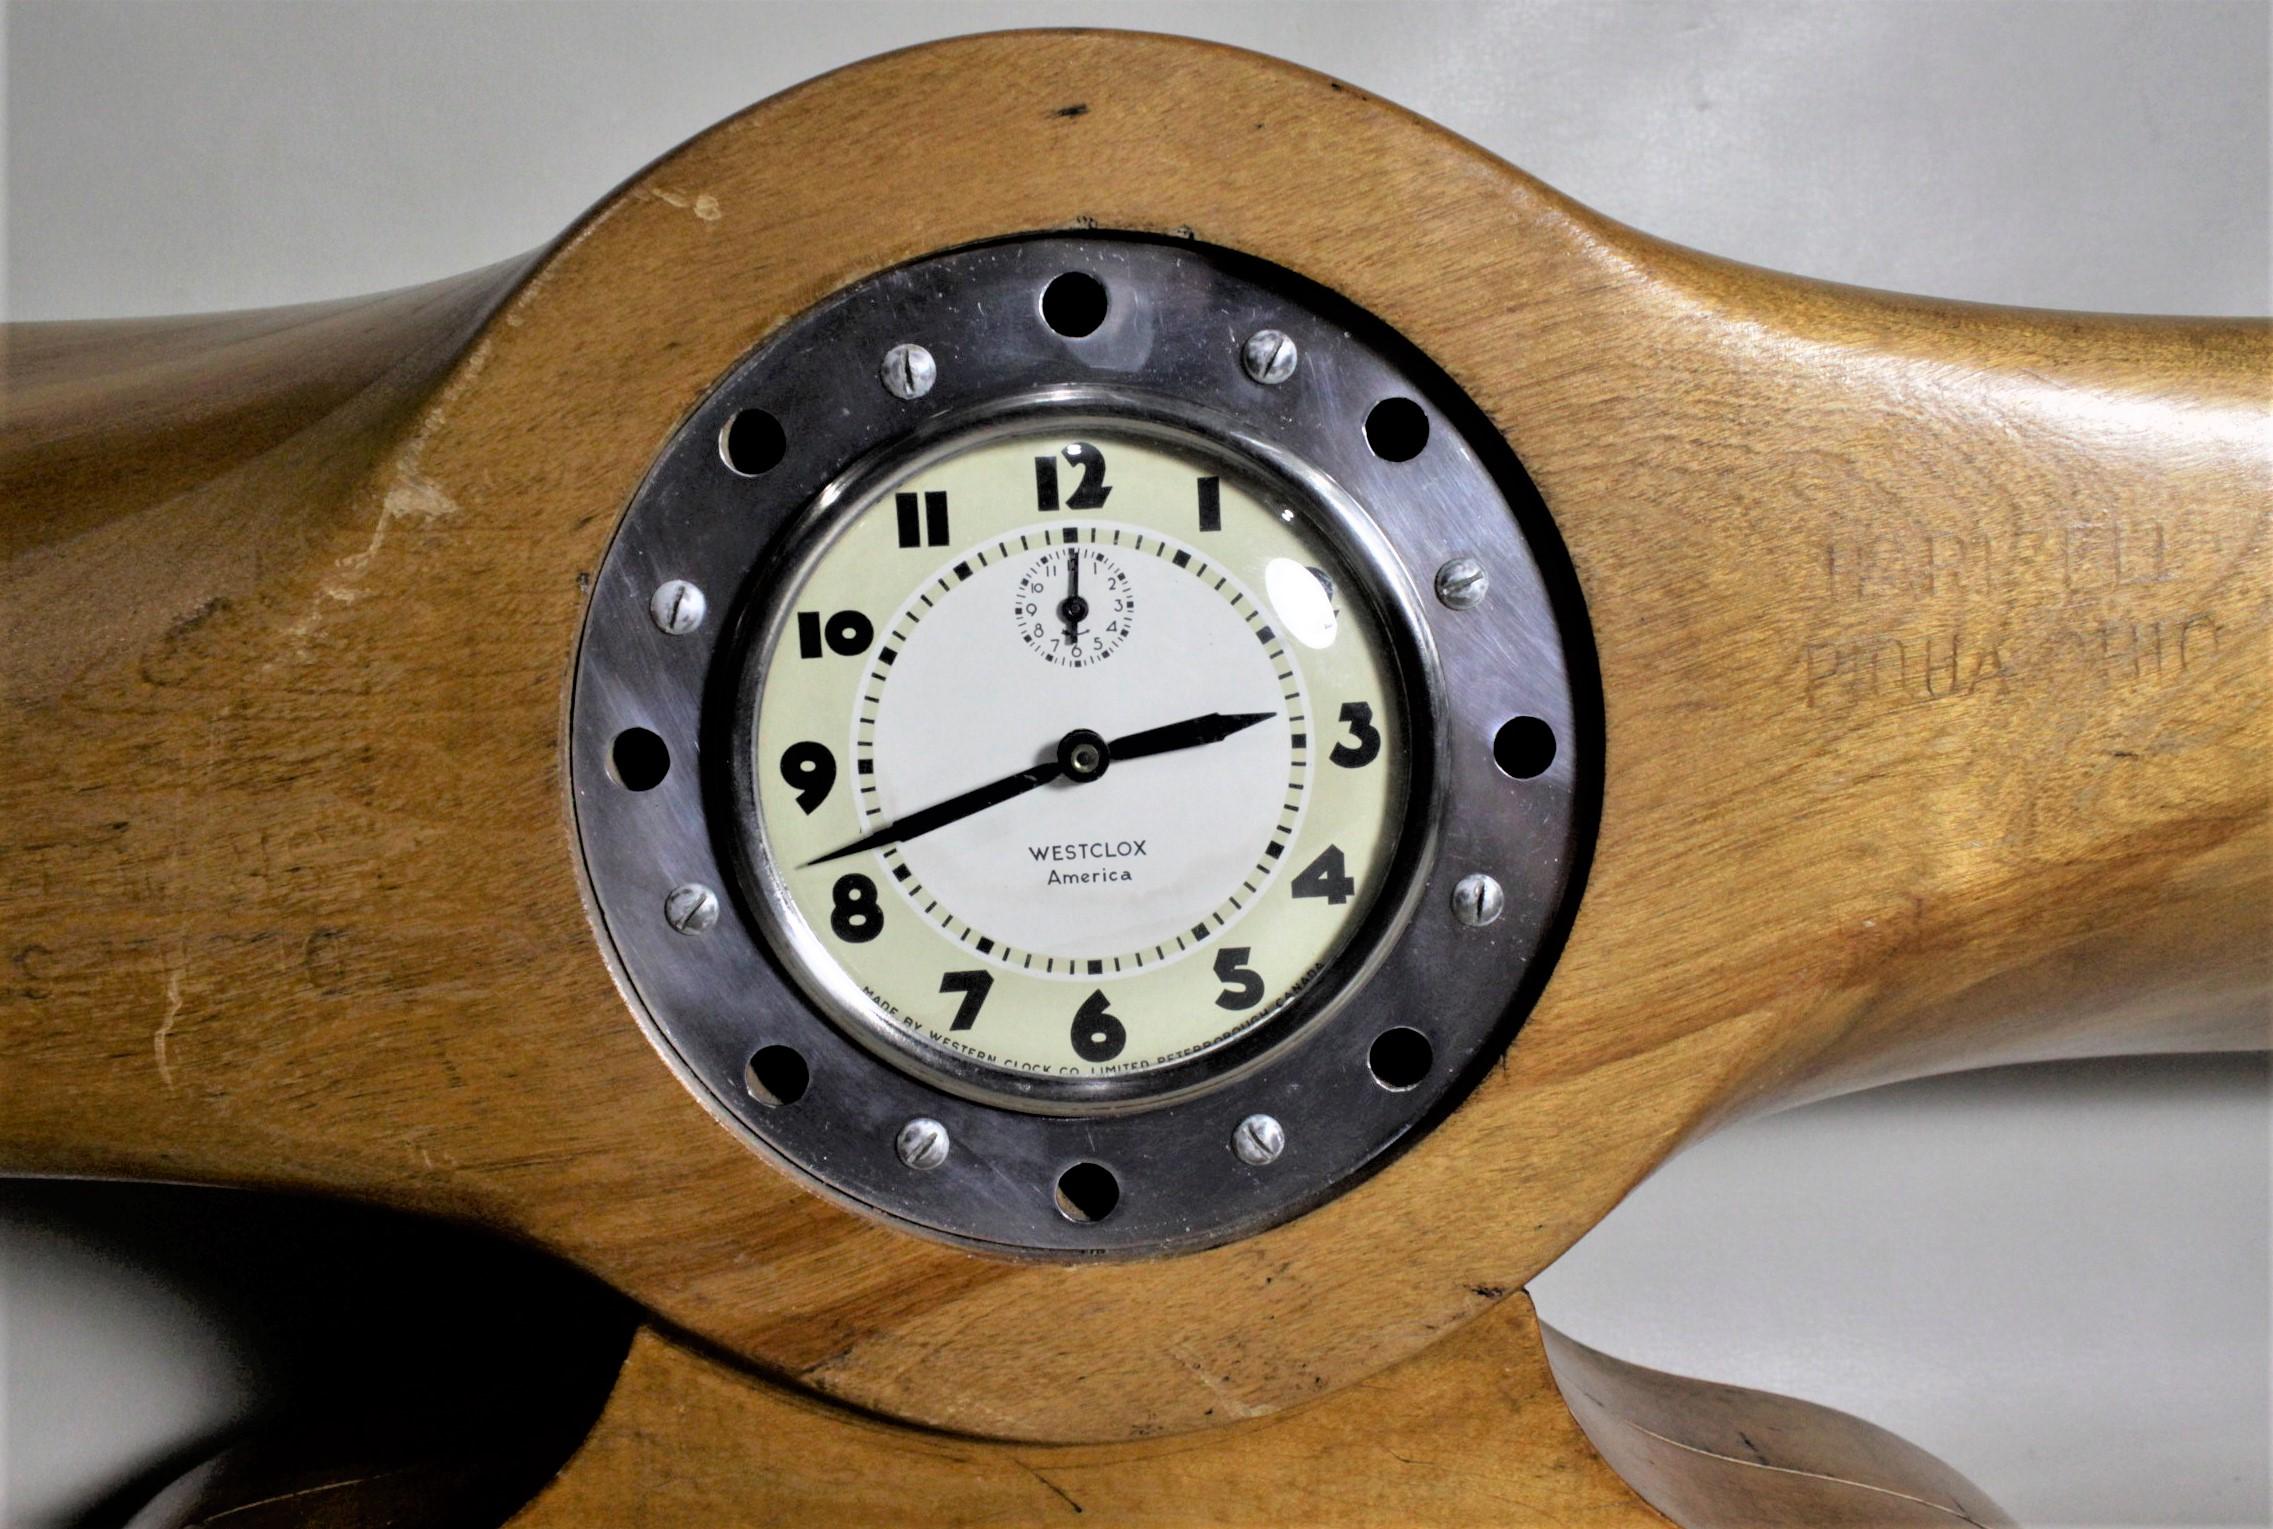 This wooden Folk Art made propeller clock is presumed to have originated in England and fashioned into a mantel clock in North America in circa 1960. The propeller has been cut and a wooden base added and a hand wind clock movement added to produce